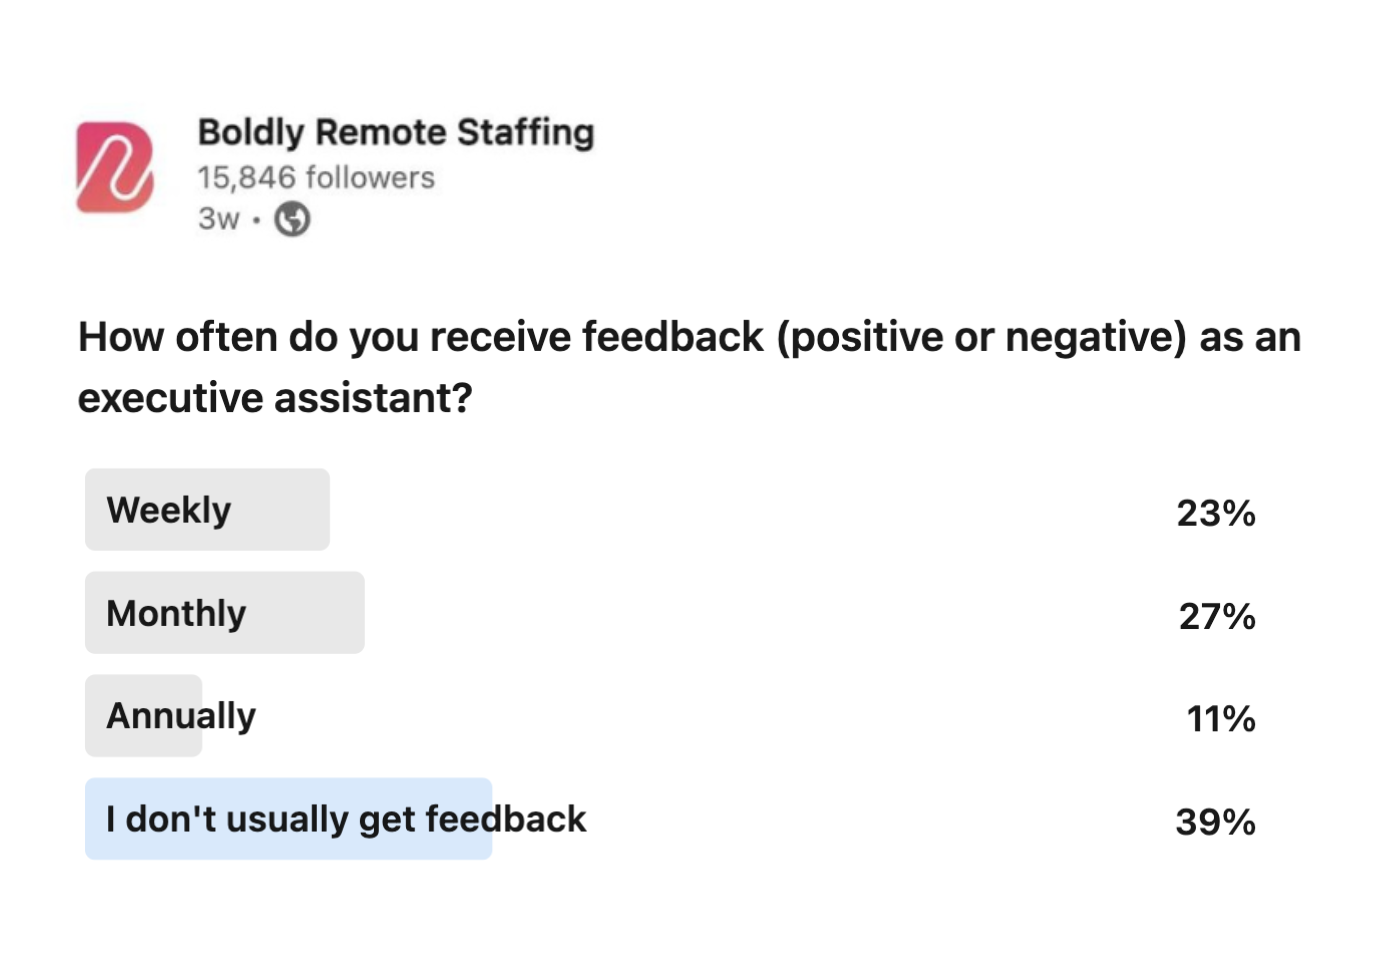 LinkedIn Poll Results -- How often do you get feedback as an executive assistant? Nearly 40% said they never receive feedback -- wow!